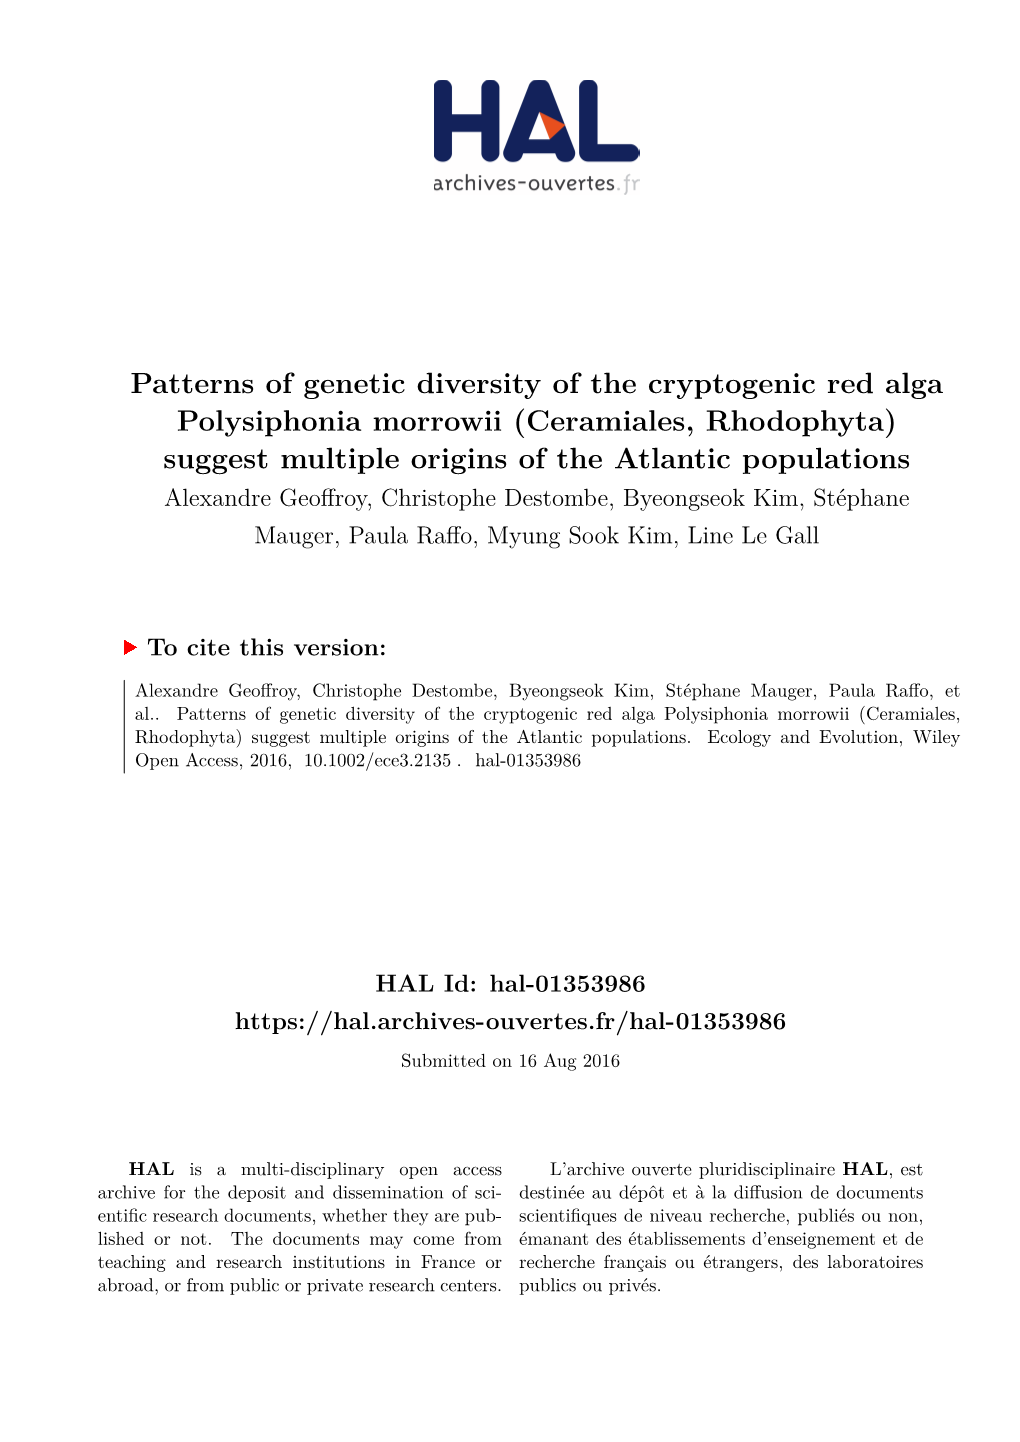 Patterns of Genetic Diversity of the Cryptogenic